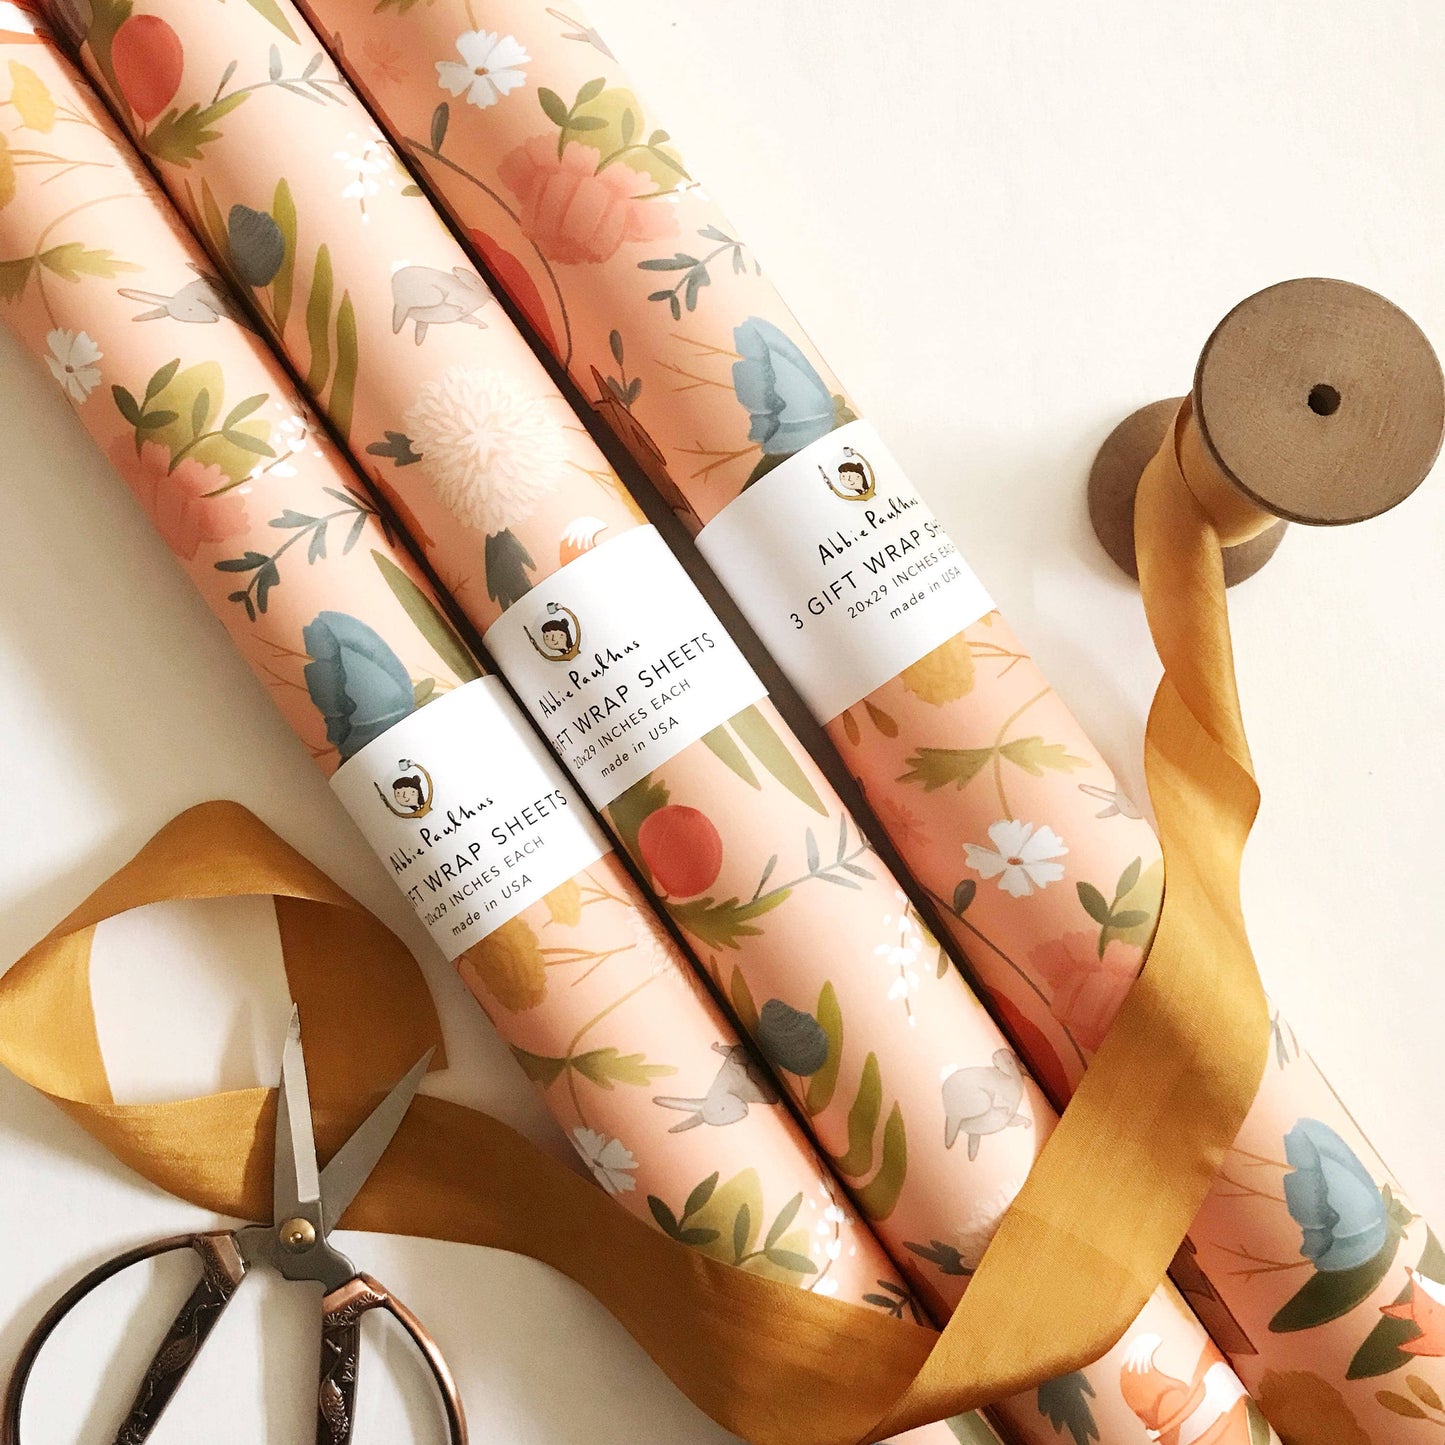 Dancing Animal Wrapping Paper - 3 sheet roll